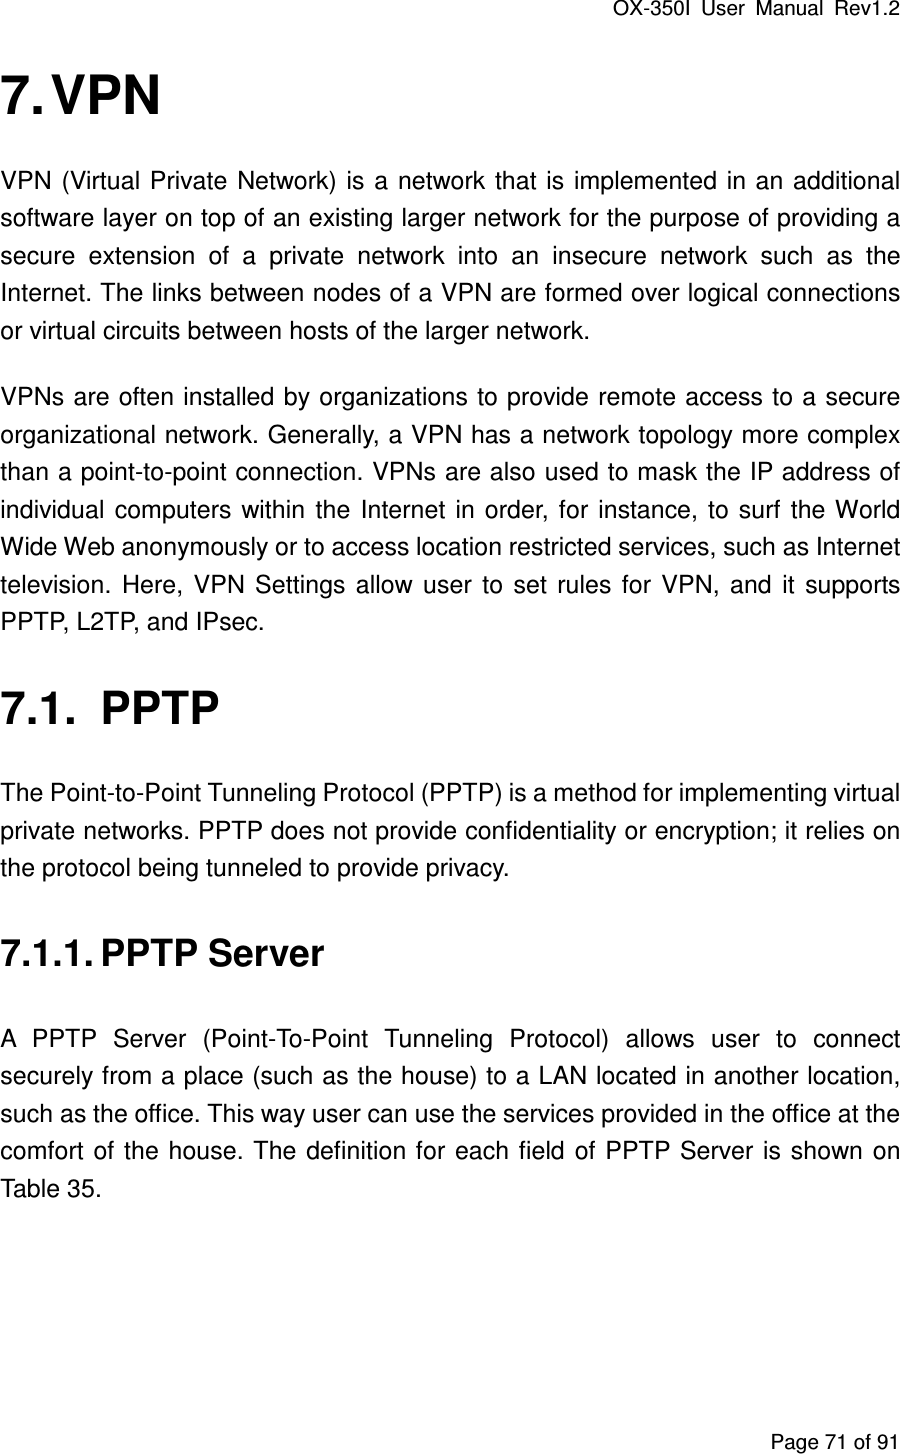 OX-350I  User  Manual  Rev1.2 Page 71 of 91 7. VPN VPN  (Virtual Private Network) is  a network that  is implemented in an additional software layer on top of an existing larger network for the purpose of providing a secure  extension  of  a  private  network  into  an  insecure  network  such  as  the Internet. The links between nodes of a VPN are formed over logical connections or virtual circuits between hosts of the larger network.   VPNs are often installed by organizations to provide remote access to a secure organizational network. Generally, a VPN has a network topology more complex than a point-to-point connection. VPNs are also used to mask the IP address of individual  computers  within  the  Internet  in  order,  for  instance,  to  surf  the World Wide Web anonymously or to access location restricted services, such as Internet television.  Here,  VPN  Settings  allow  user  to  set  rules  for  VPN,  and  it  supports PPTP, L2TP, and IPsec. 7.1.  PPTP The Point-to-Point Tunneling Protocol (PPTP) is a method for implementing virtual private networks. PPTP does not provide confidentiality or encryption; it relies on the protocol being tunneled to provide privacy. 7.1.1. PPTP Server A  PPTP  Server  (Point-To-Point  Tunneling  Protocol)  allows  user  to  connect securely from a place (such as the house) to a LAN located in another location, such as the office. This way user can use the services provided in the office at the comfort  of the house. The definition for  each field of PPTP Server is  shown on Table 35. 